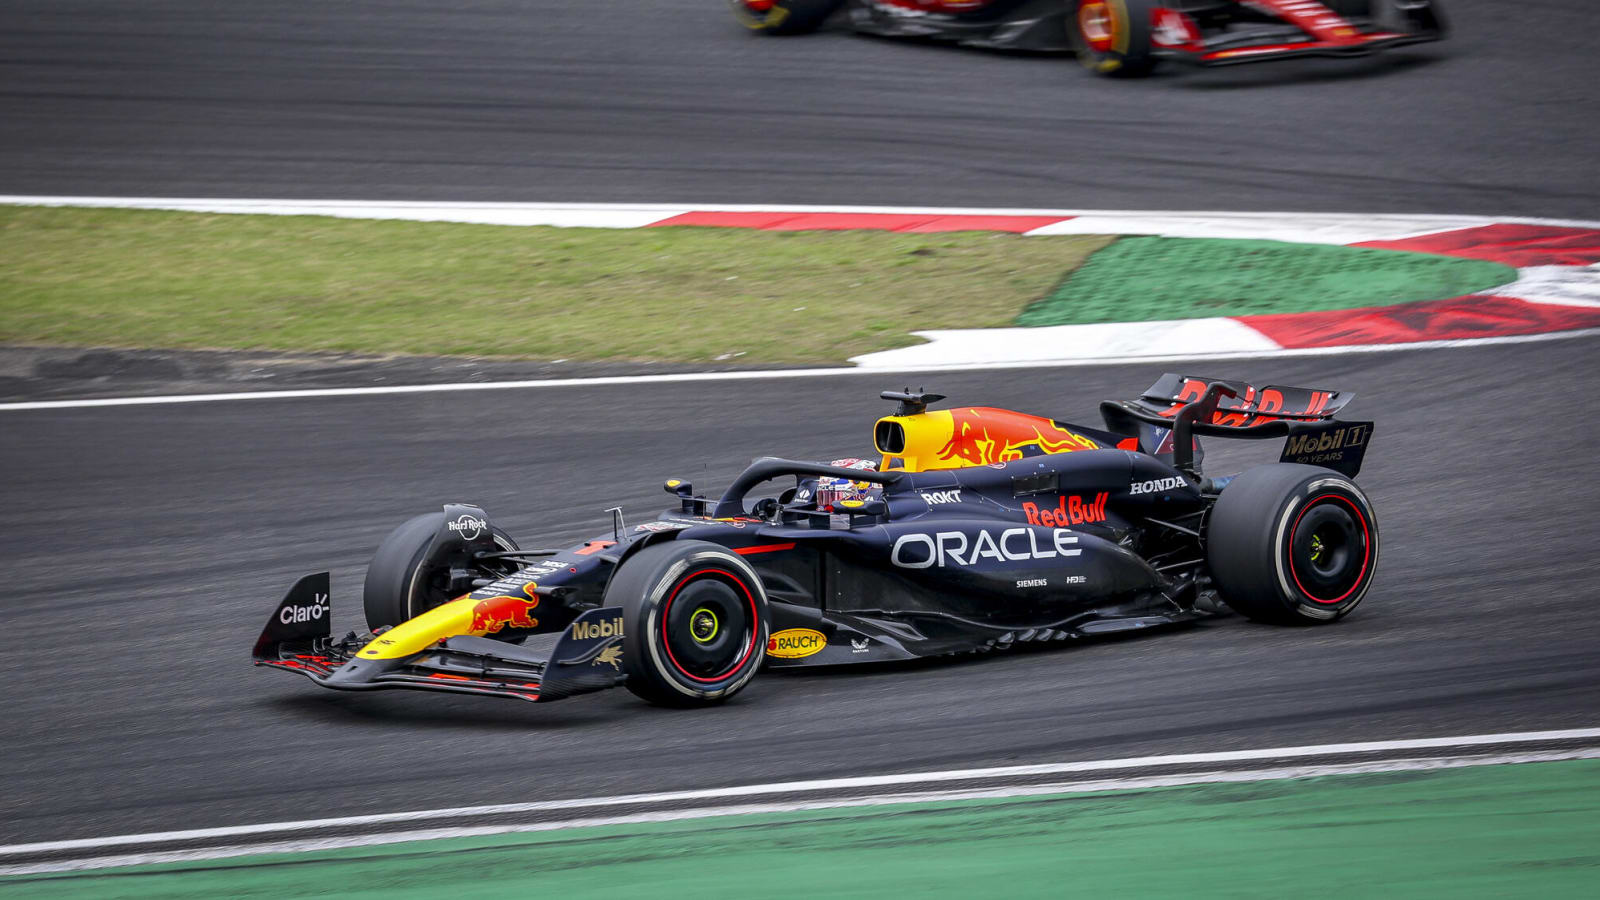 Watch: Red Bull doublestack Max Verstappen and Sergio Perez with incredible 2-second pitstops at Chinese GP